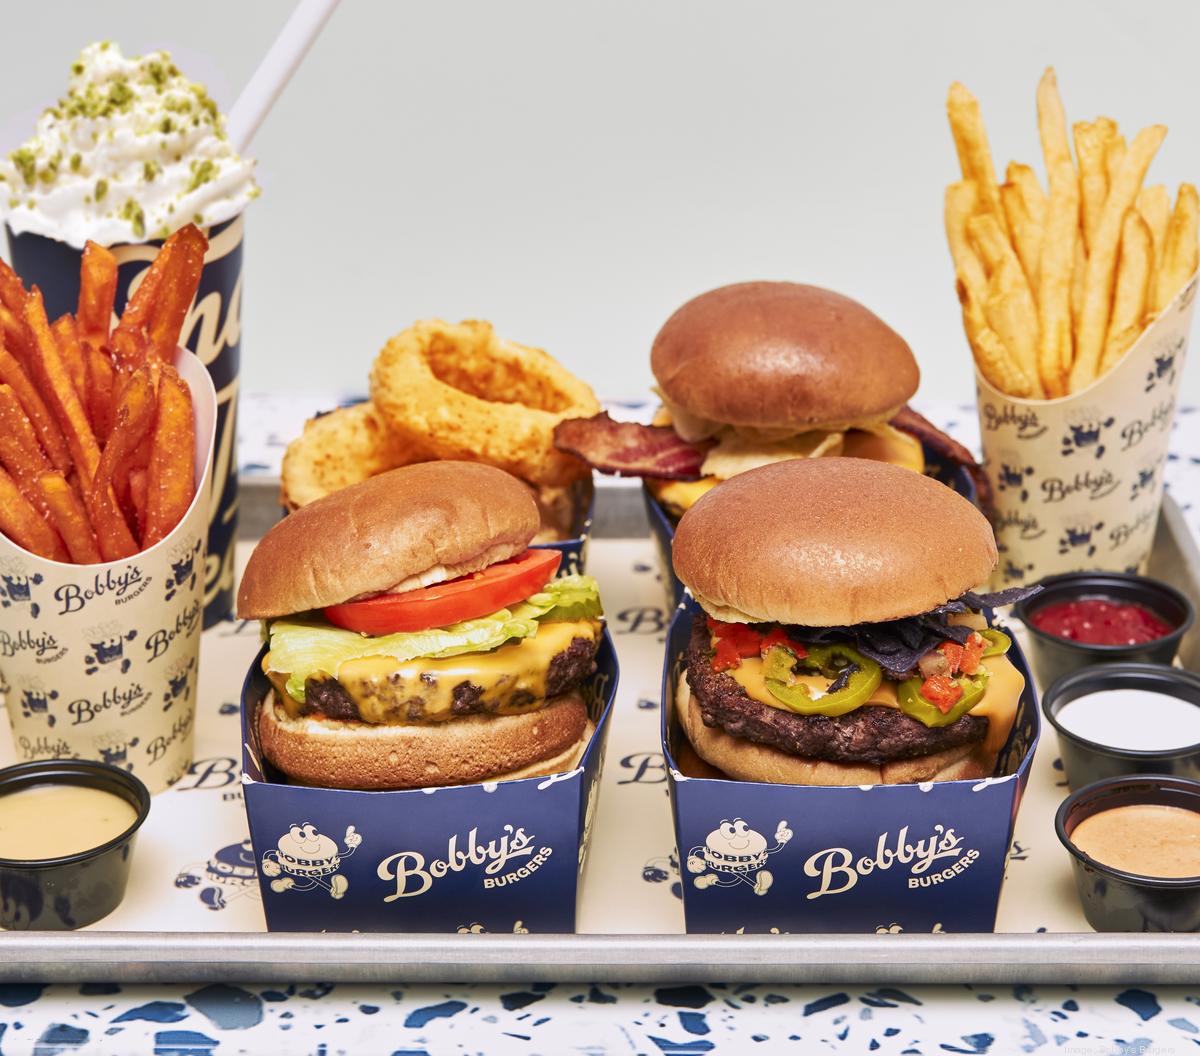 - Flay Burgers Journal Business picks RDU Celebrity chef Triangle Bobby\'s Bobby restaurant for